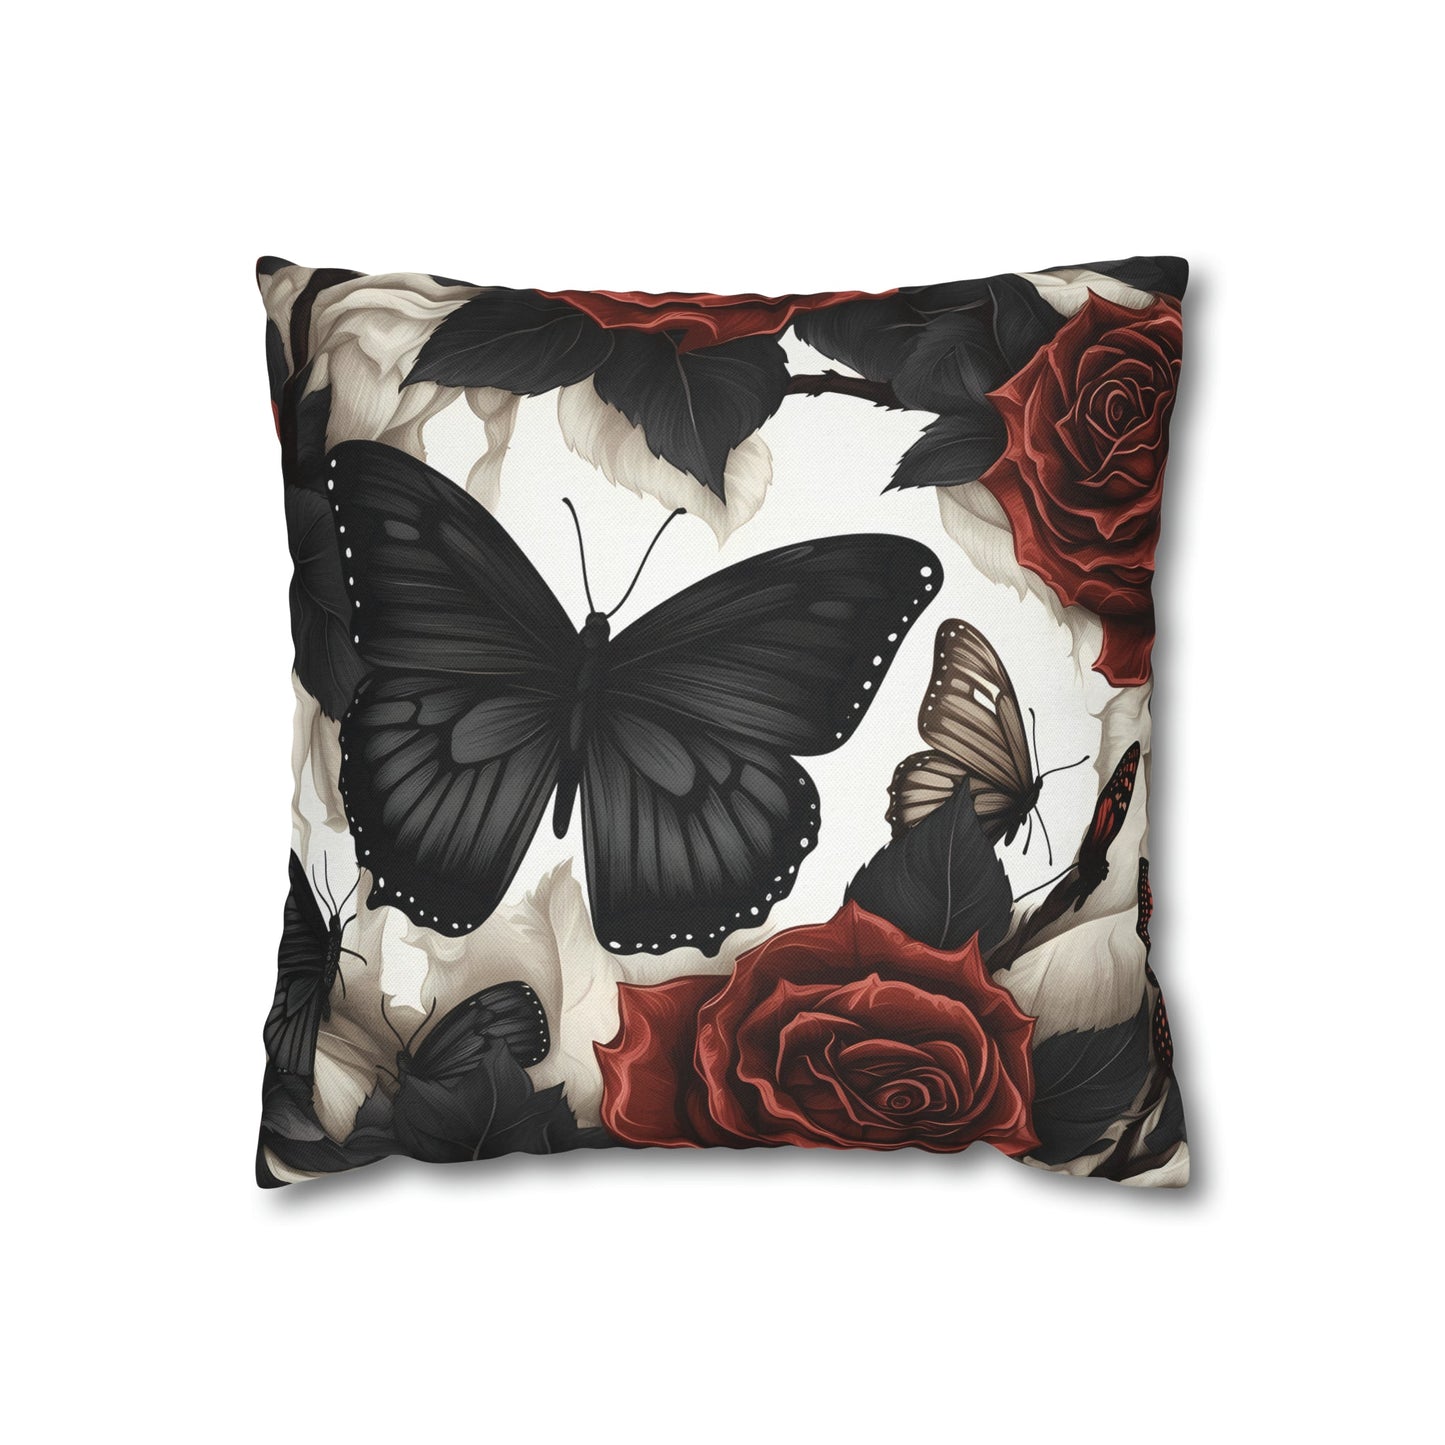 Red Roses and Black Butterflies Square Pillow CaseHome DecorVTZdesigns18" × 18"All Over PrintAOPBed